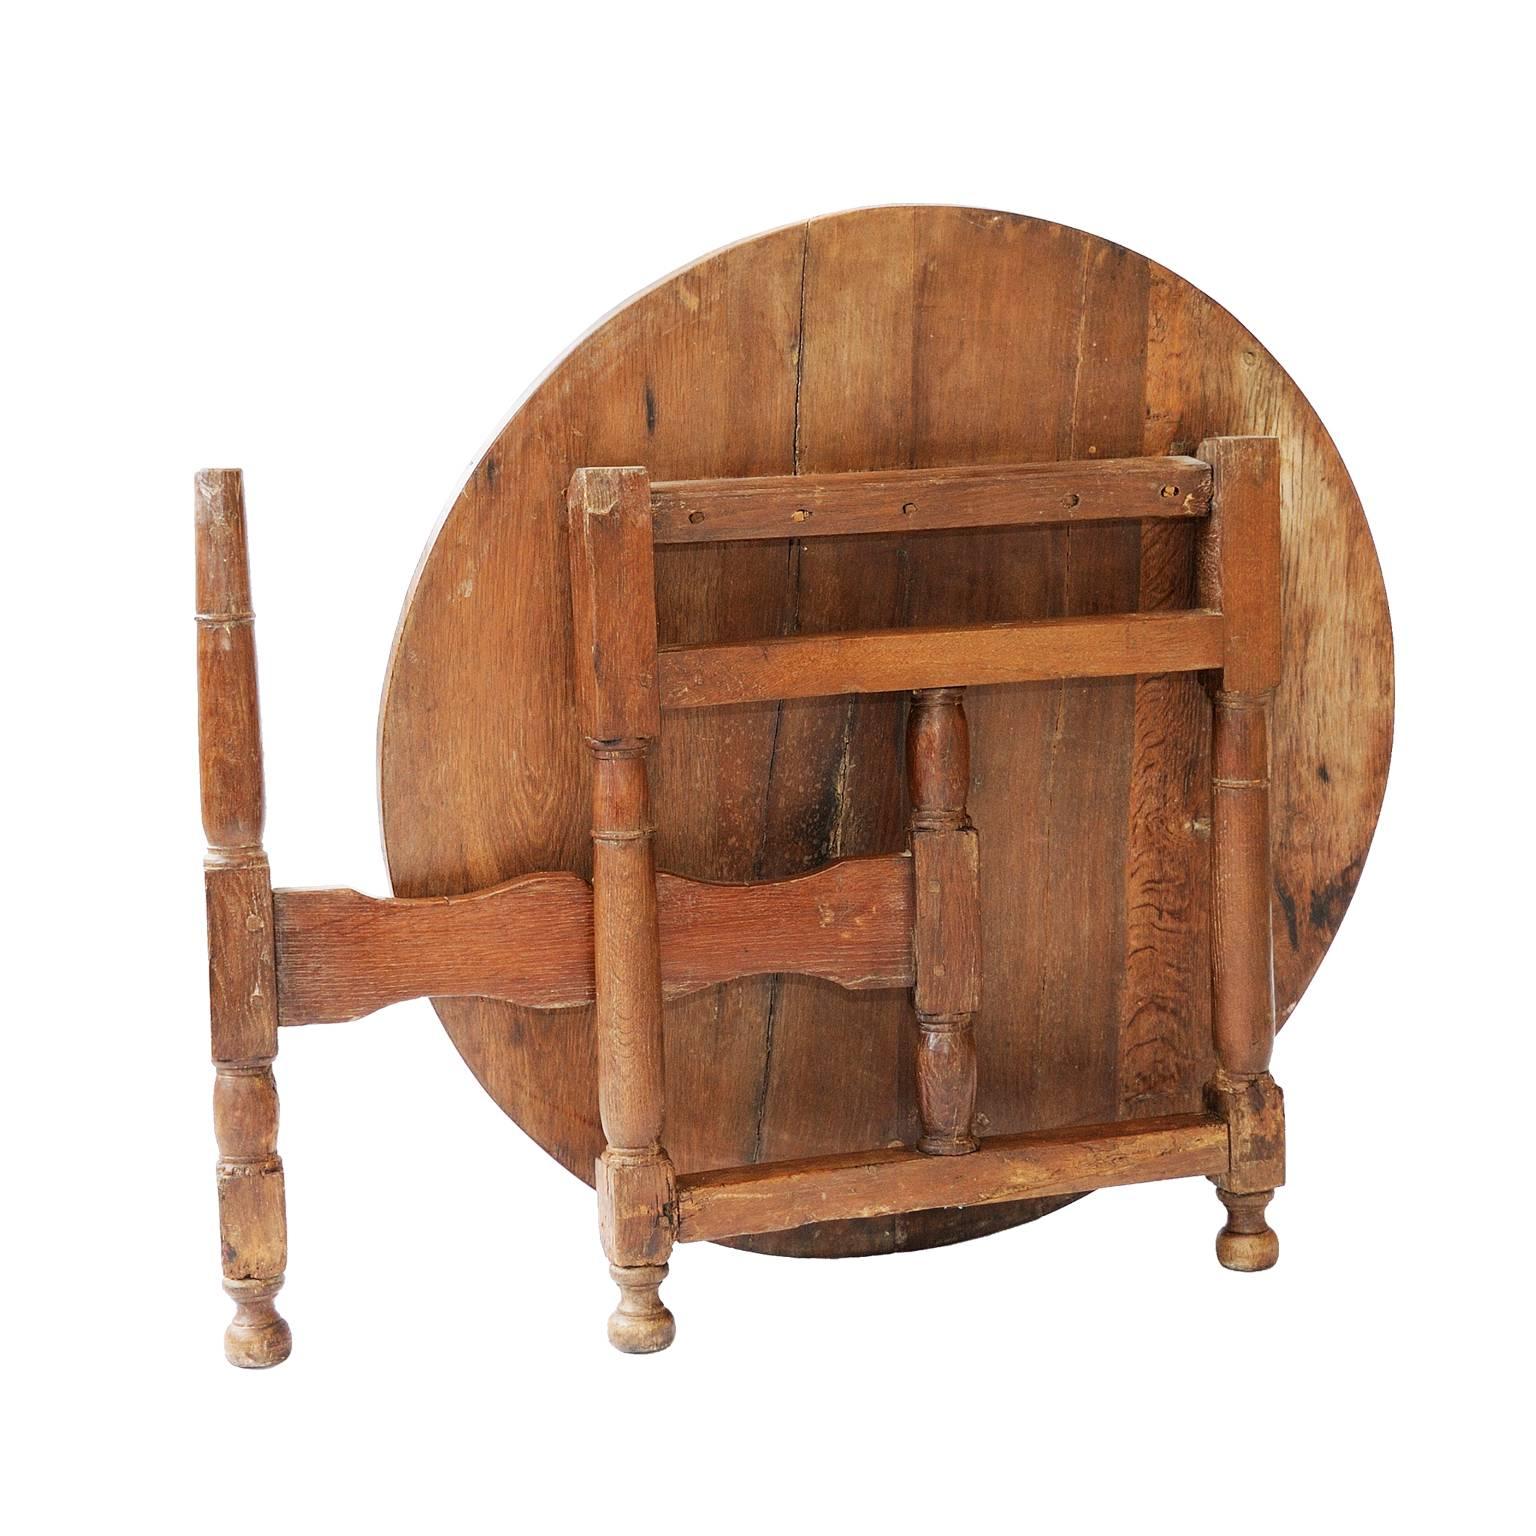 This is a stunning and rather rare example of a late 17th Century North Italian folding oak coaching/wine tasting Table, the oak displays a very pleasing patina, circa 1680.